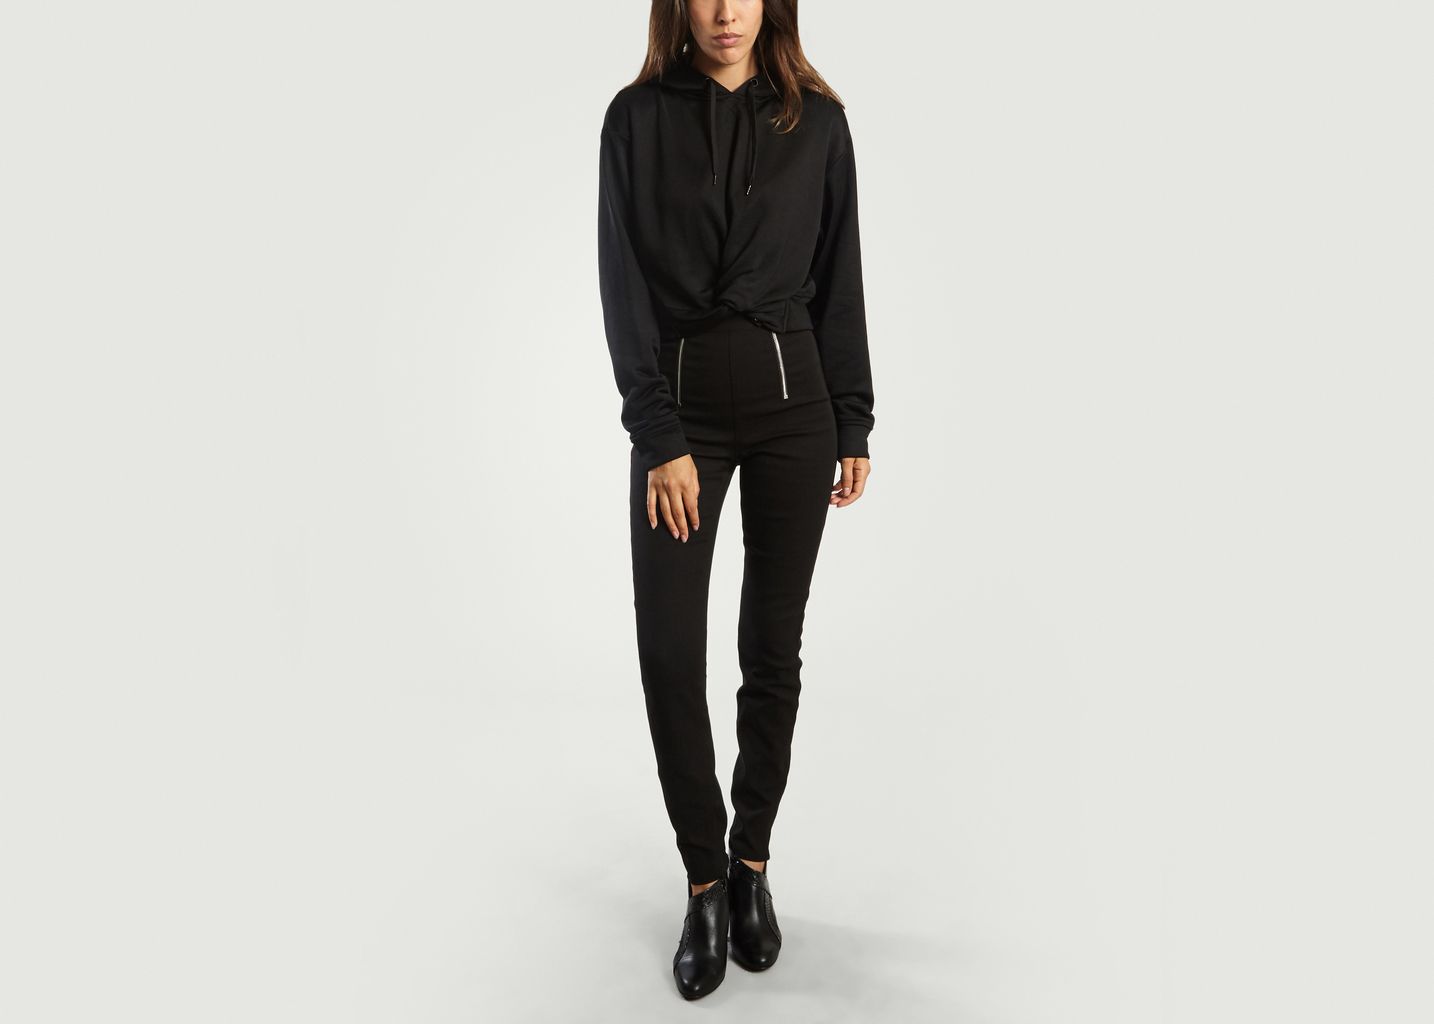 Knot Cropped Hoodie - T by Alexander Wang